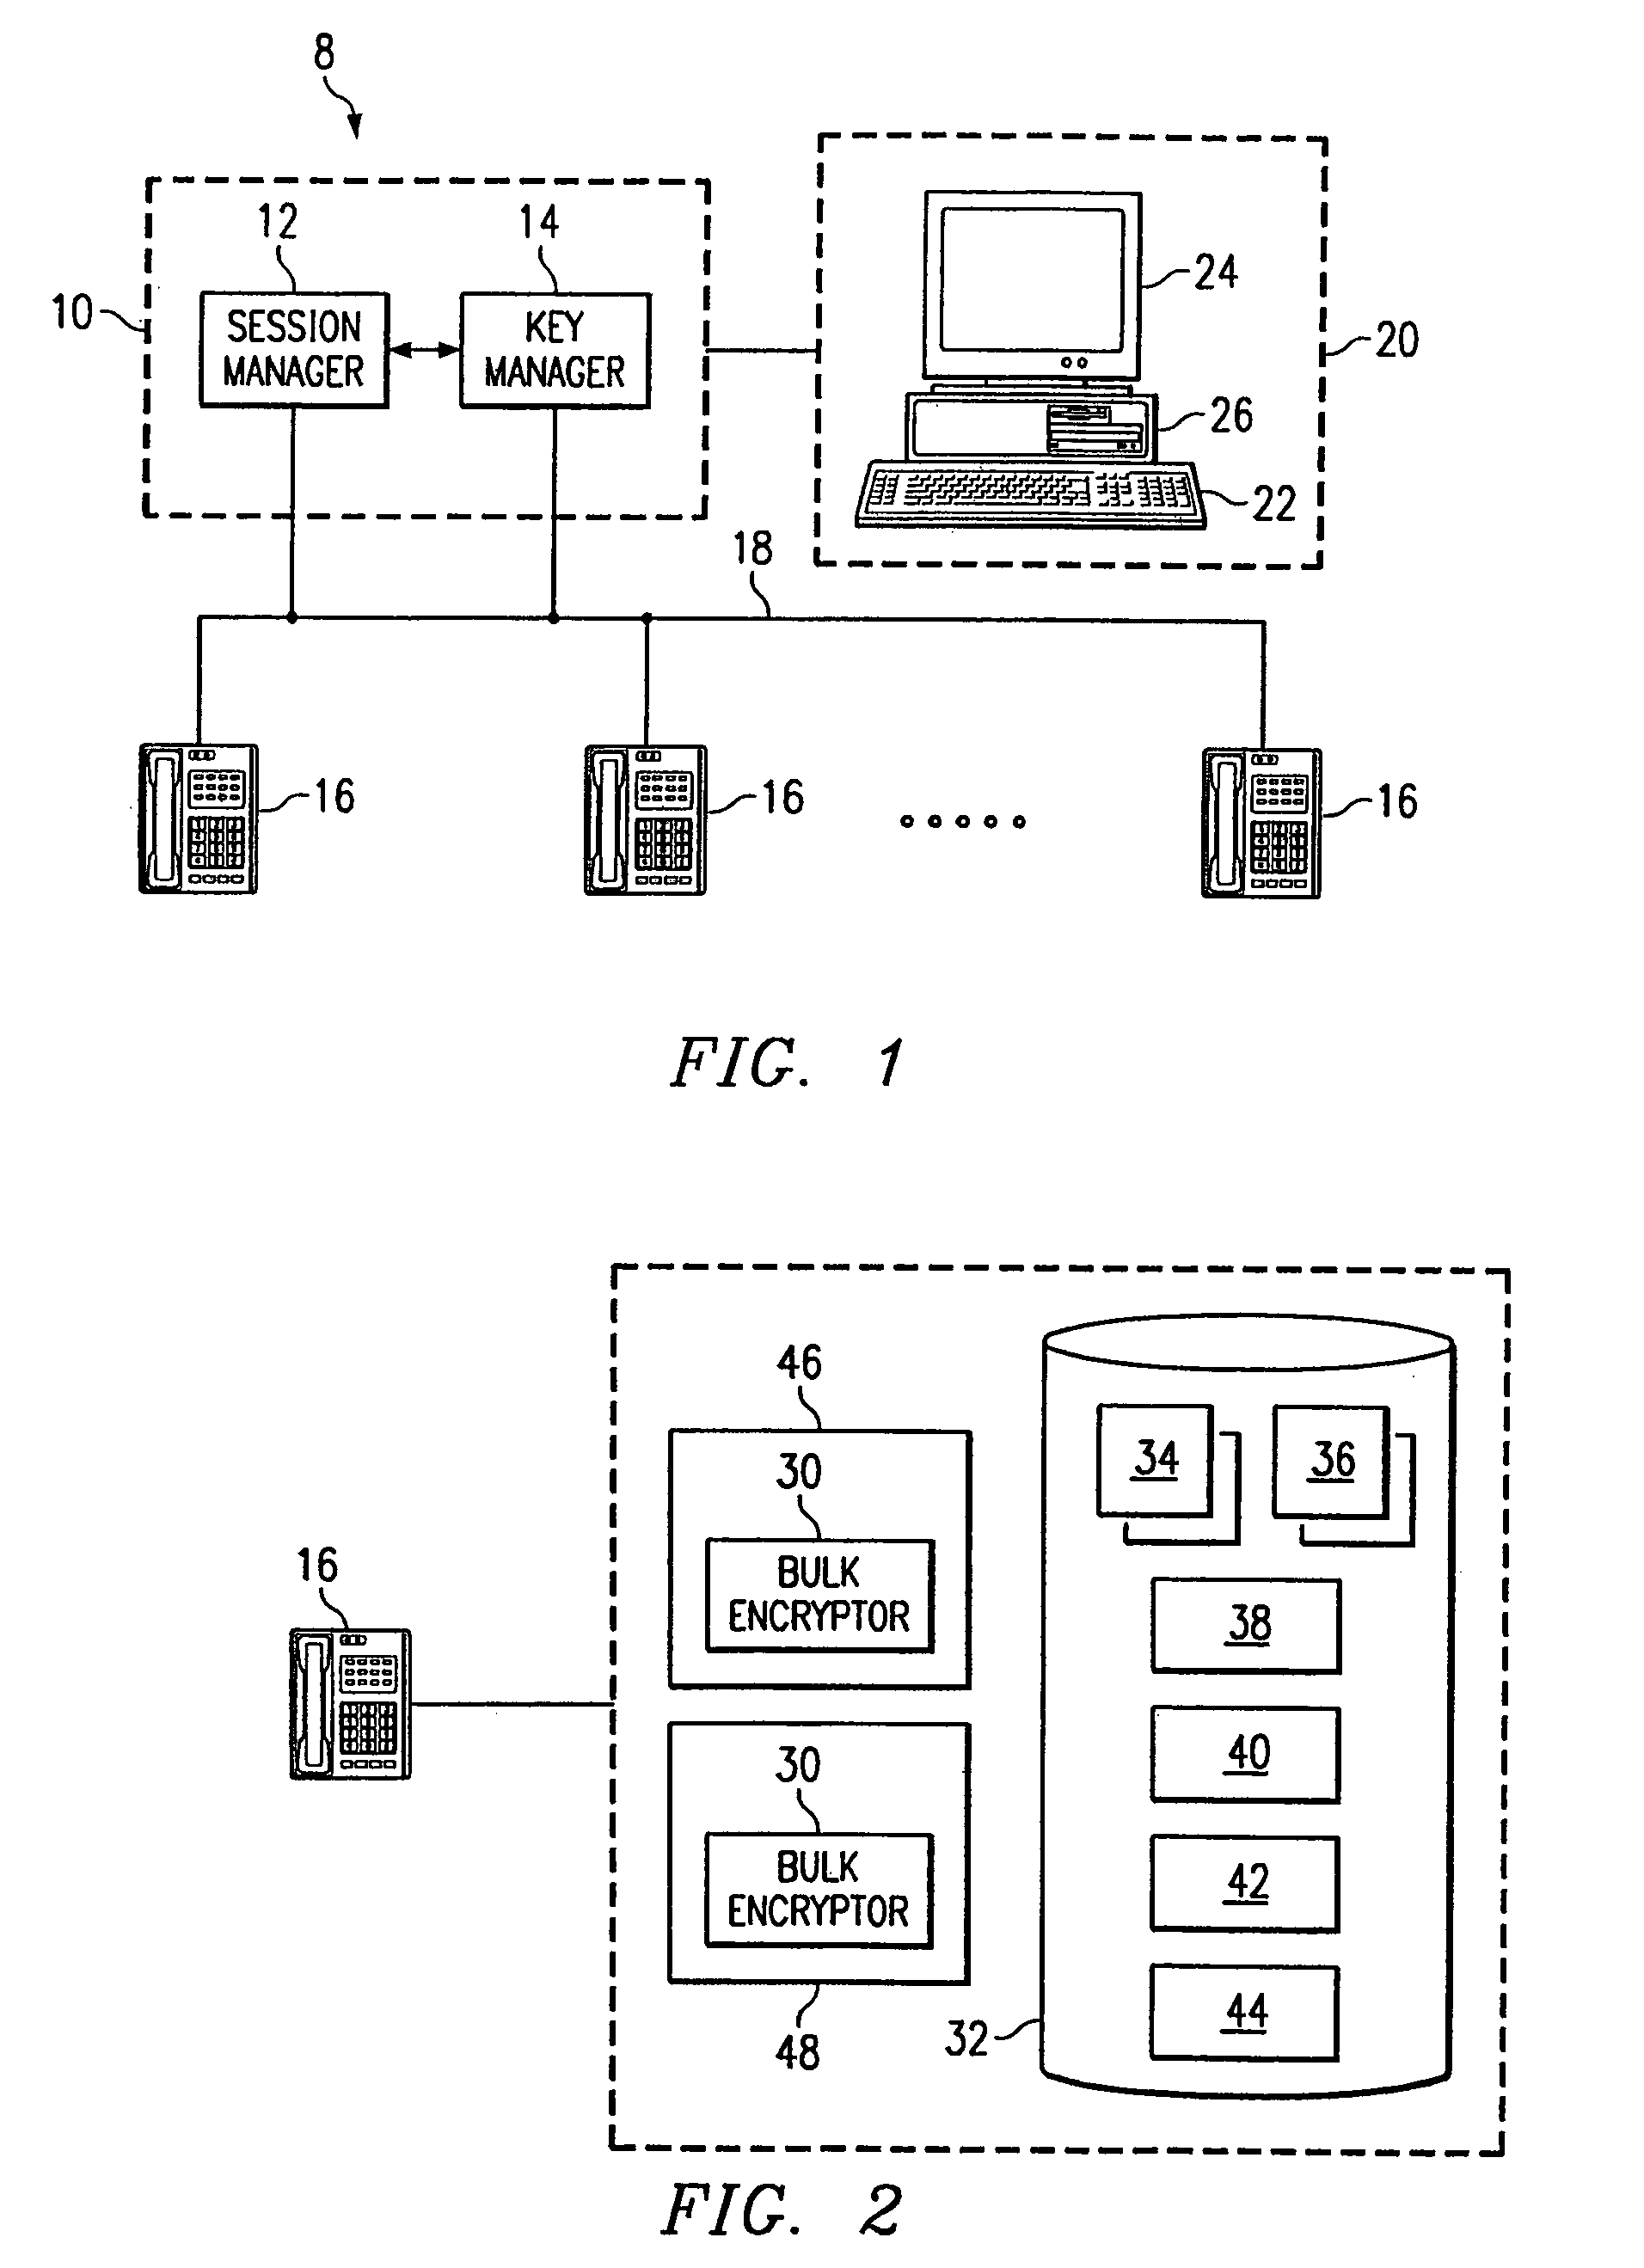 Encrypting information in a communications network